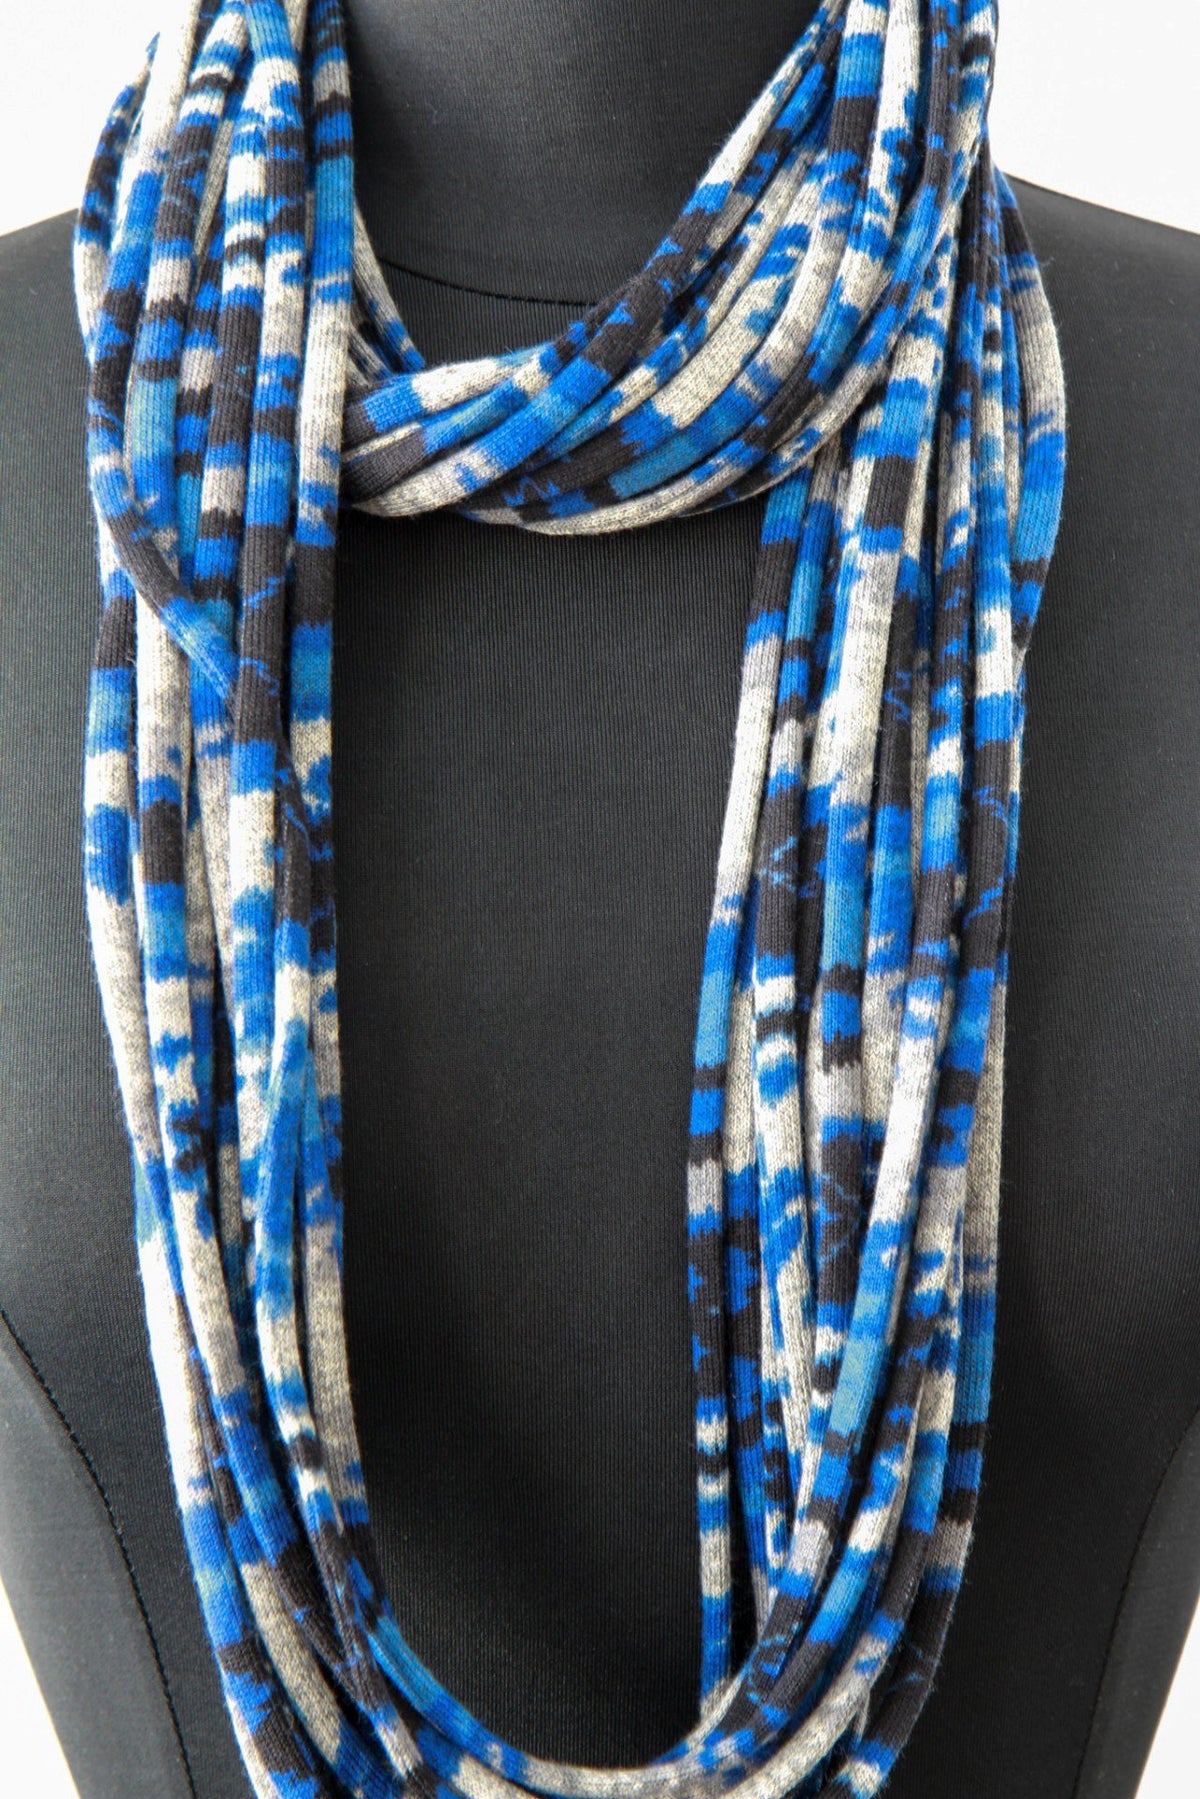 Unisex Handmade Scarf with Blue and Black Graphic Print 